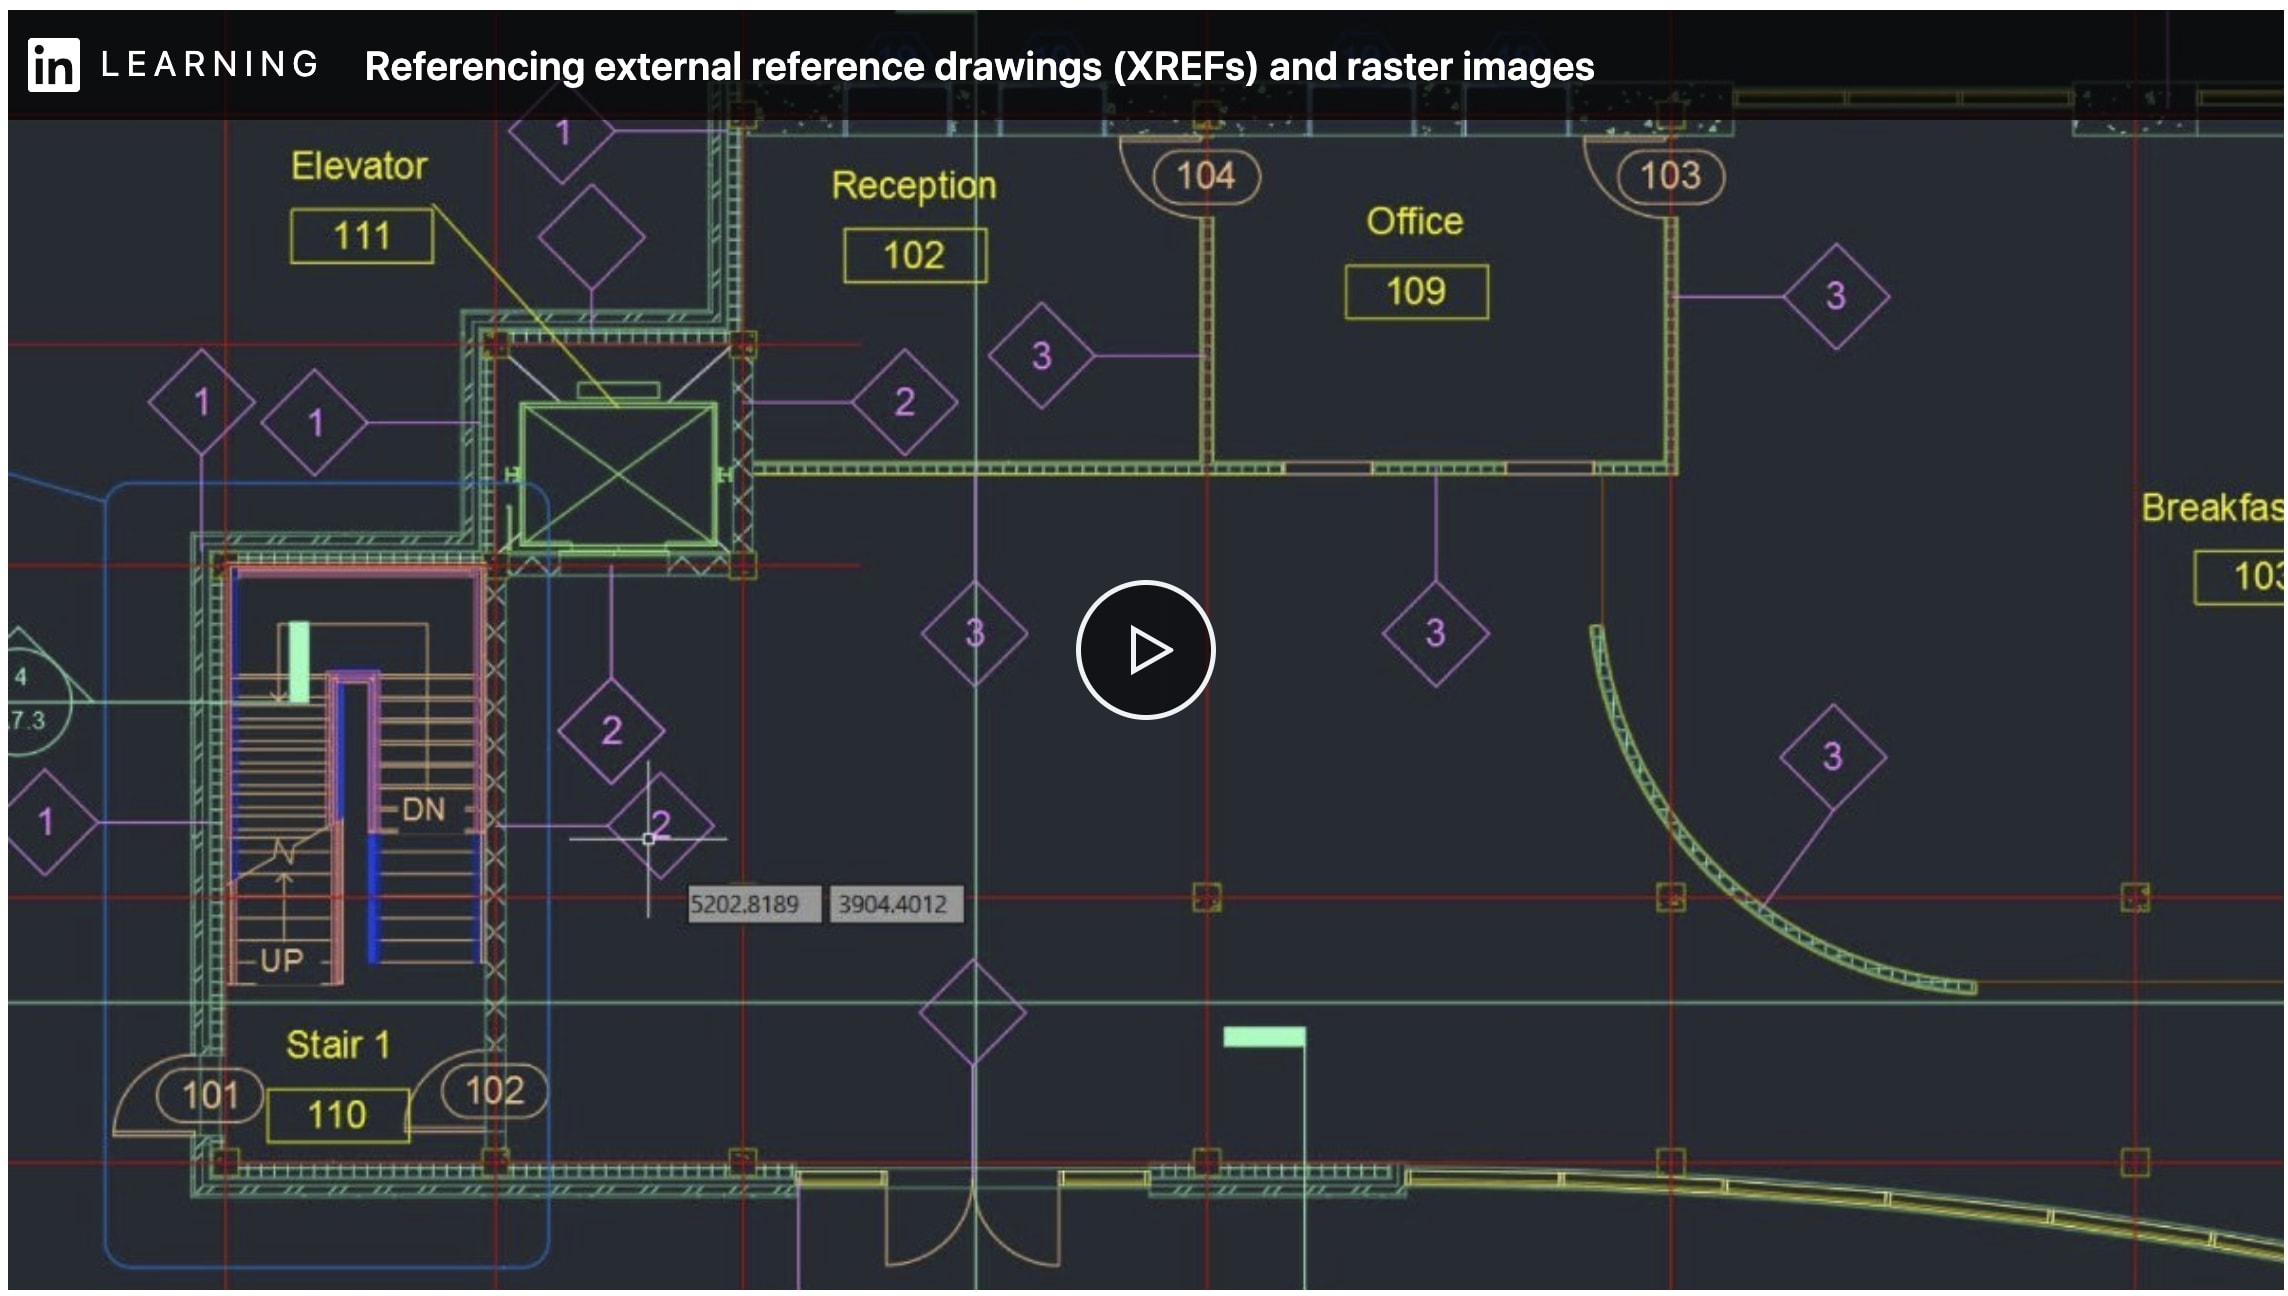 Referencing XREFs and raster images in AutoCAD